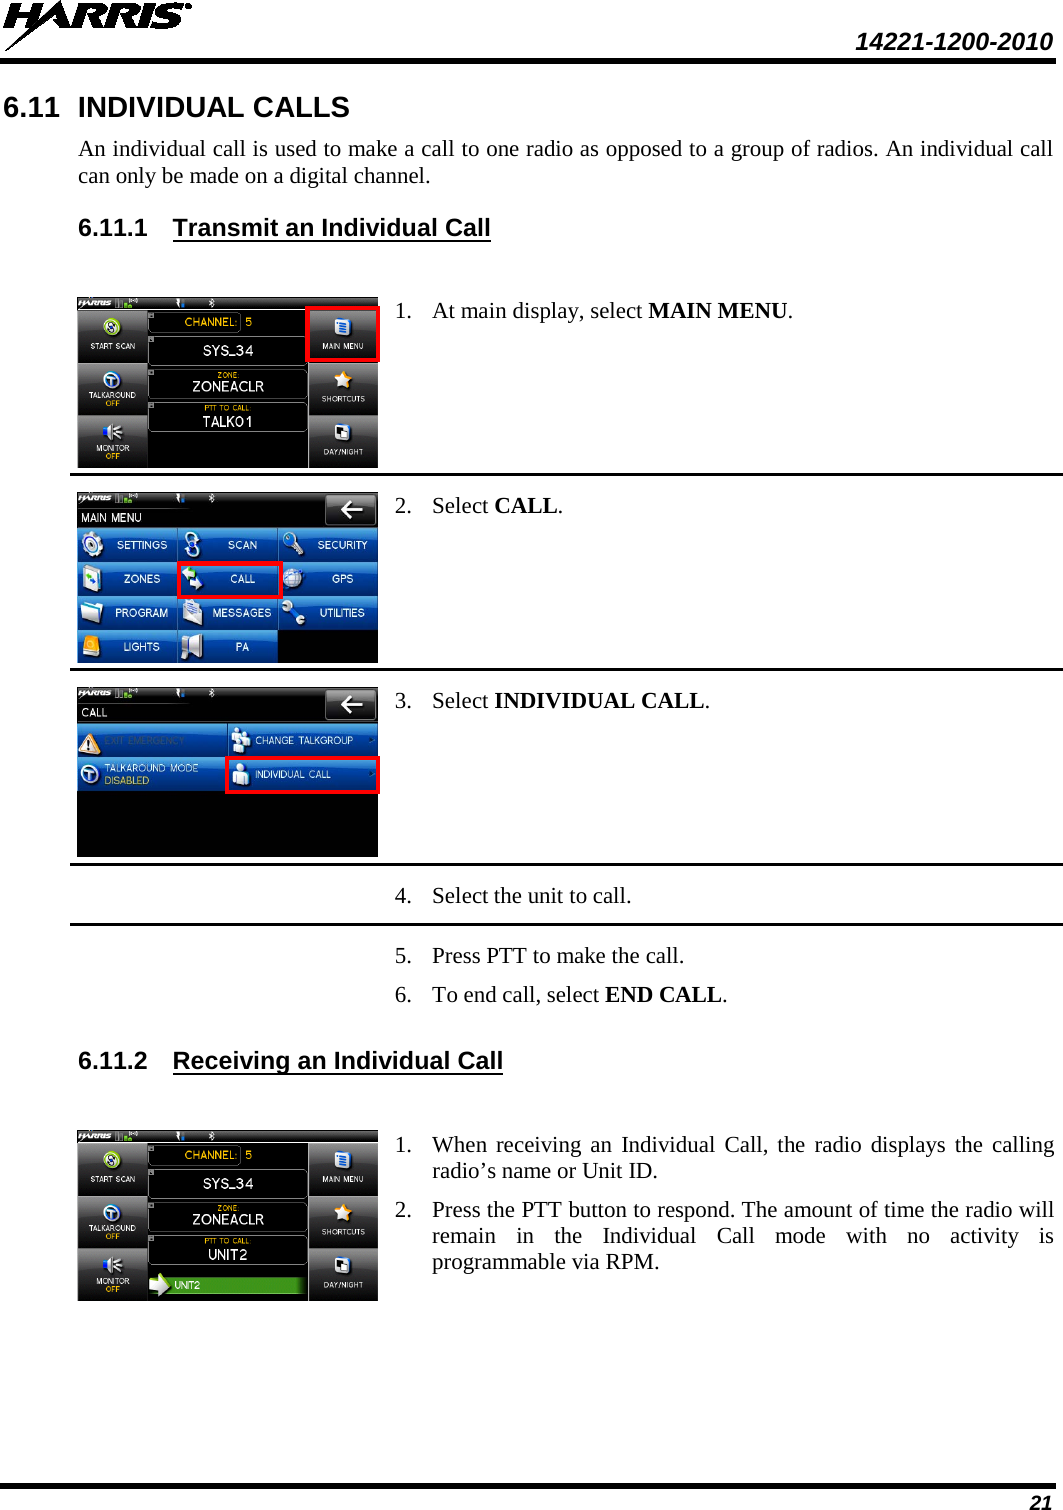  14221-1200-2010 21 6.11 INDIVIDUAL CALLS An individual call is used to make a call to one radio as opposed to a group of radios. An individual call can only be made on a digital channel.  6.11.1 Transmit an Individual Call   1. At main display, select MAIN MENU.  2. Select CALL.  3. Select INDIVIDUAL CALL.    4. Select the unit to call.    5. Press PTT to make the call.  6. To end call, select END CALL. 6.11.2 Receiving an Individual Call   1. When receiving an Individual Call, the radio displays the calling radio’s name or Unit ID. 2. Press the PTT button to respond. The amount of time the radio will remain in the Individual Call mode with no activity is programmable via RPM. 